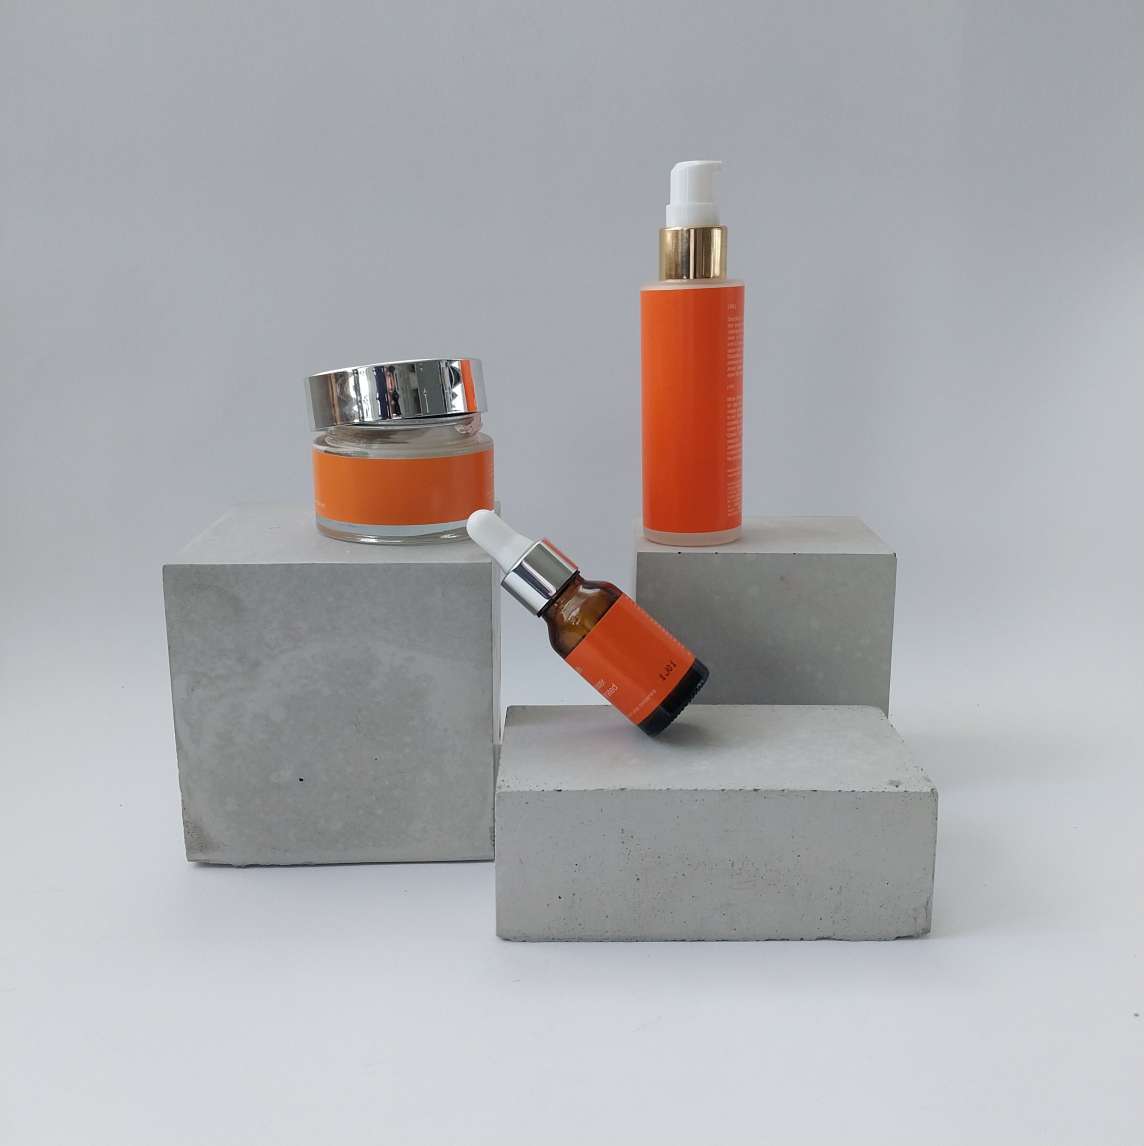 Large Concrete Display Blocks, from £20